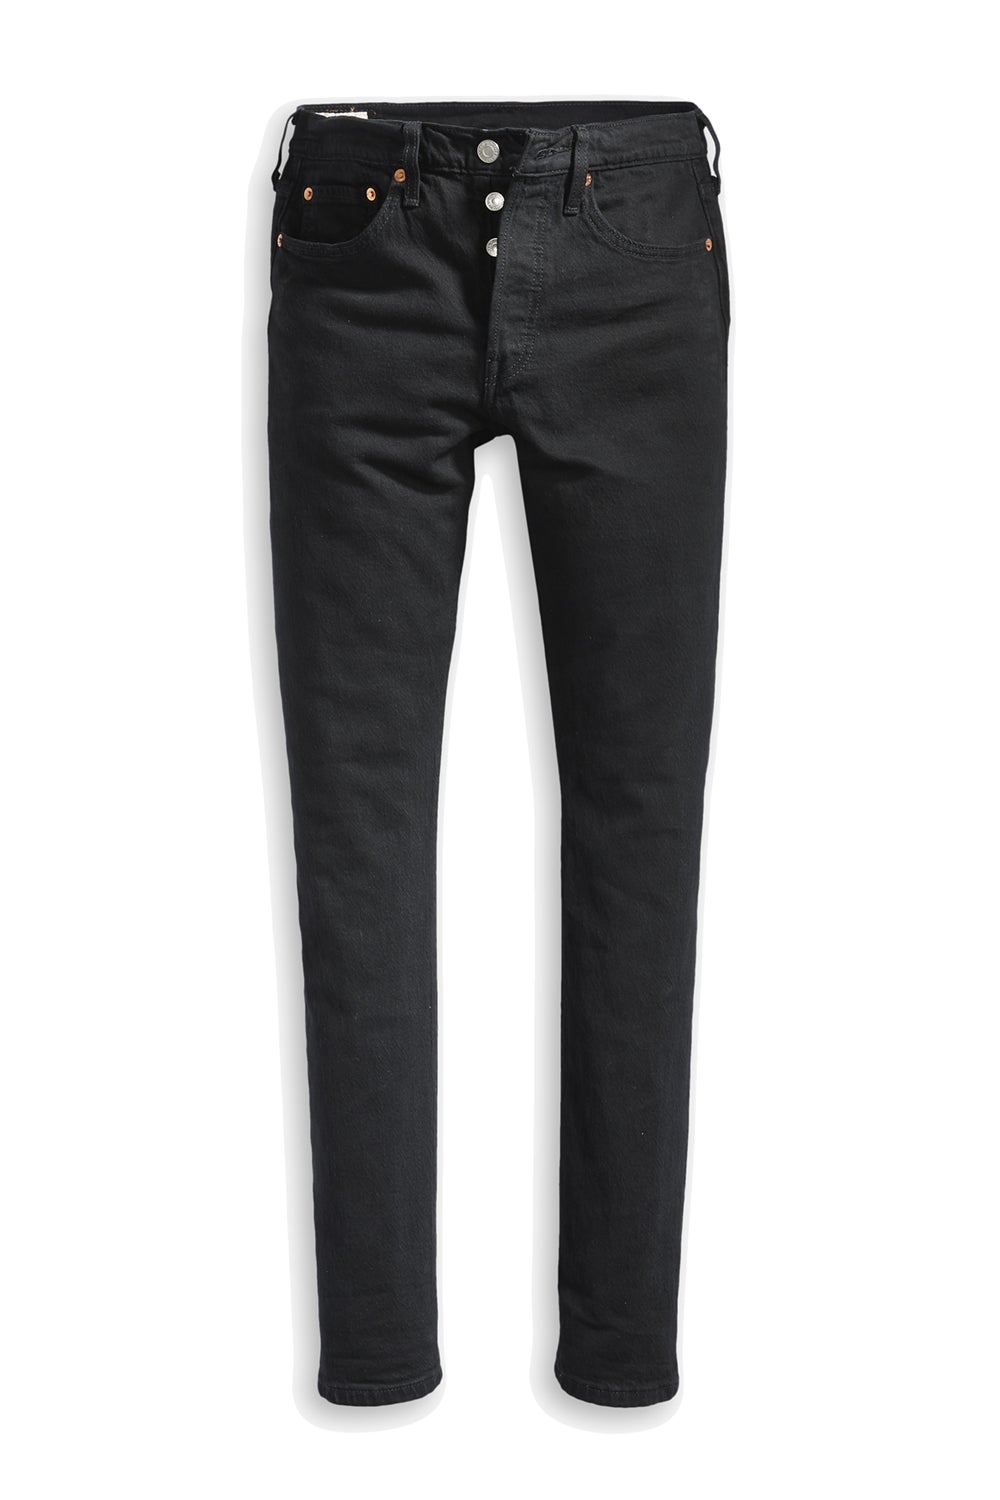 Levi's Wedgie Straight Jeans Black Sprout